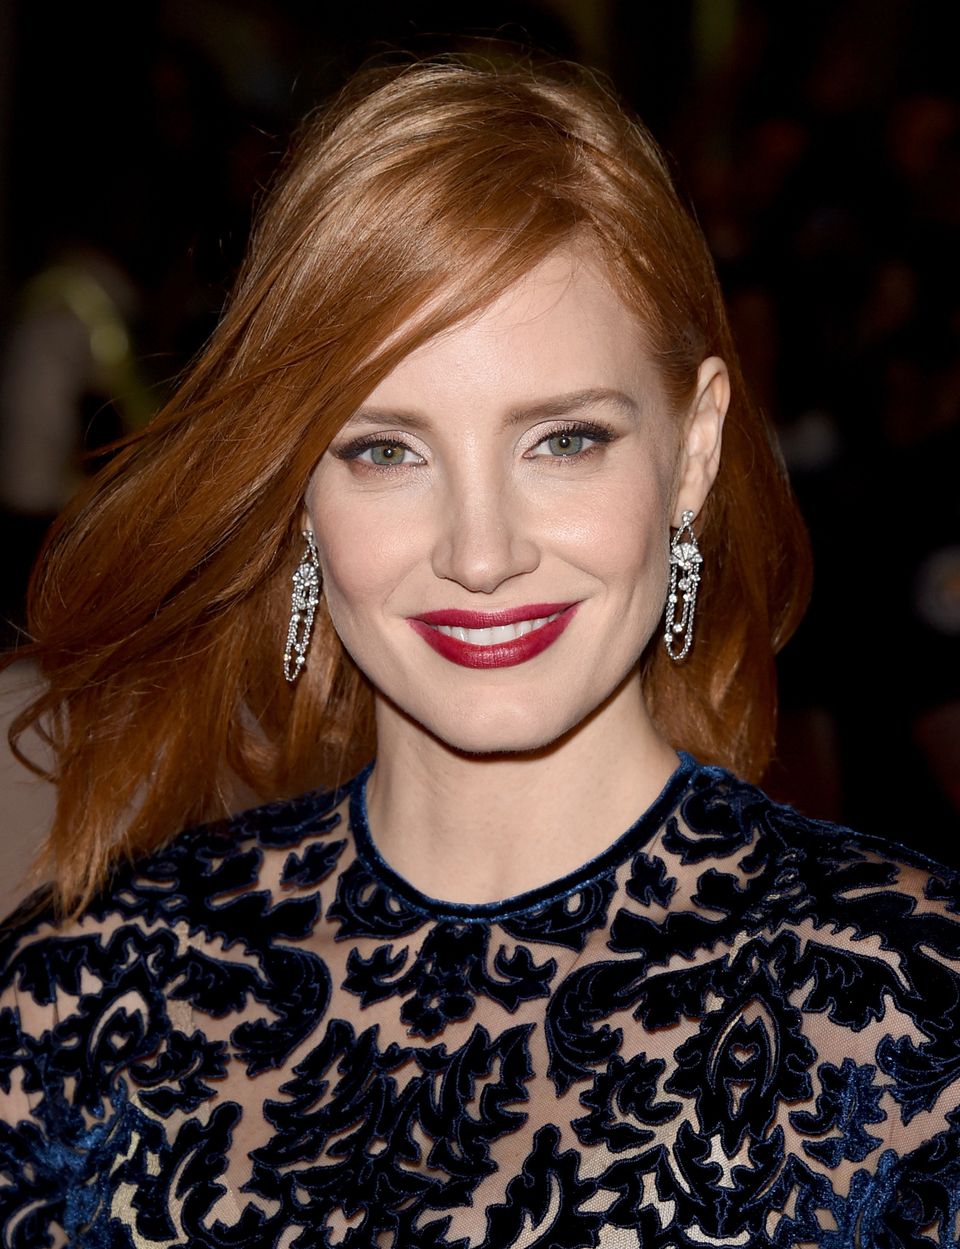 Redheads shouldn't wear red lipstick. WRONG!